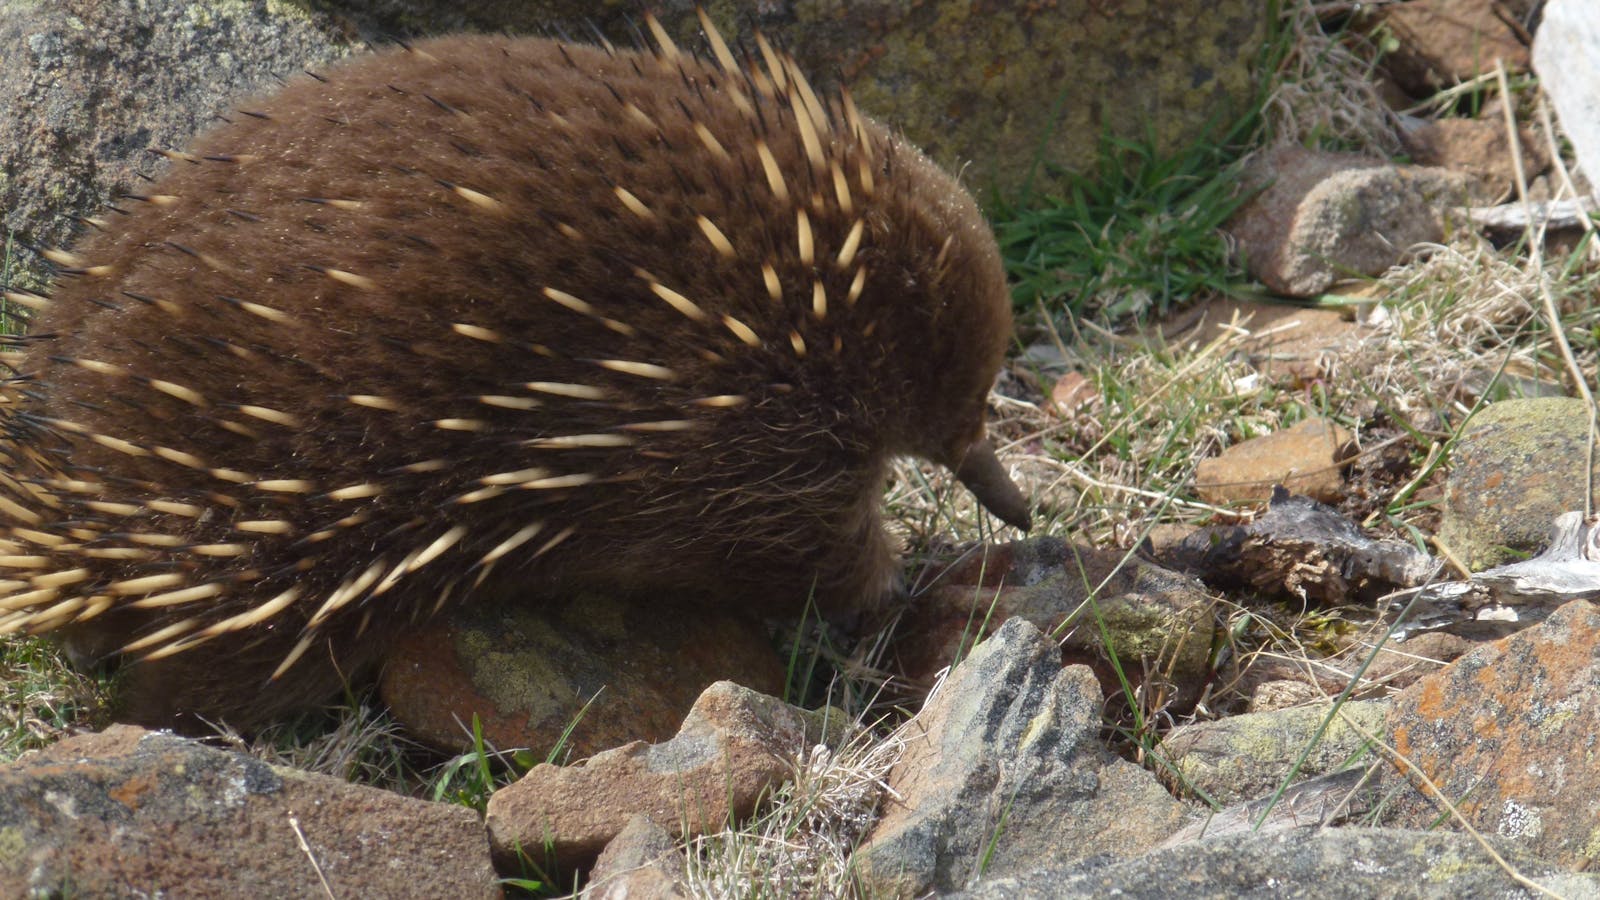 An echidna, part of the wildlife you might experience in the Central Highlands